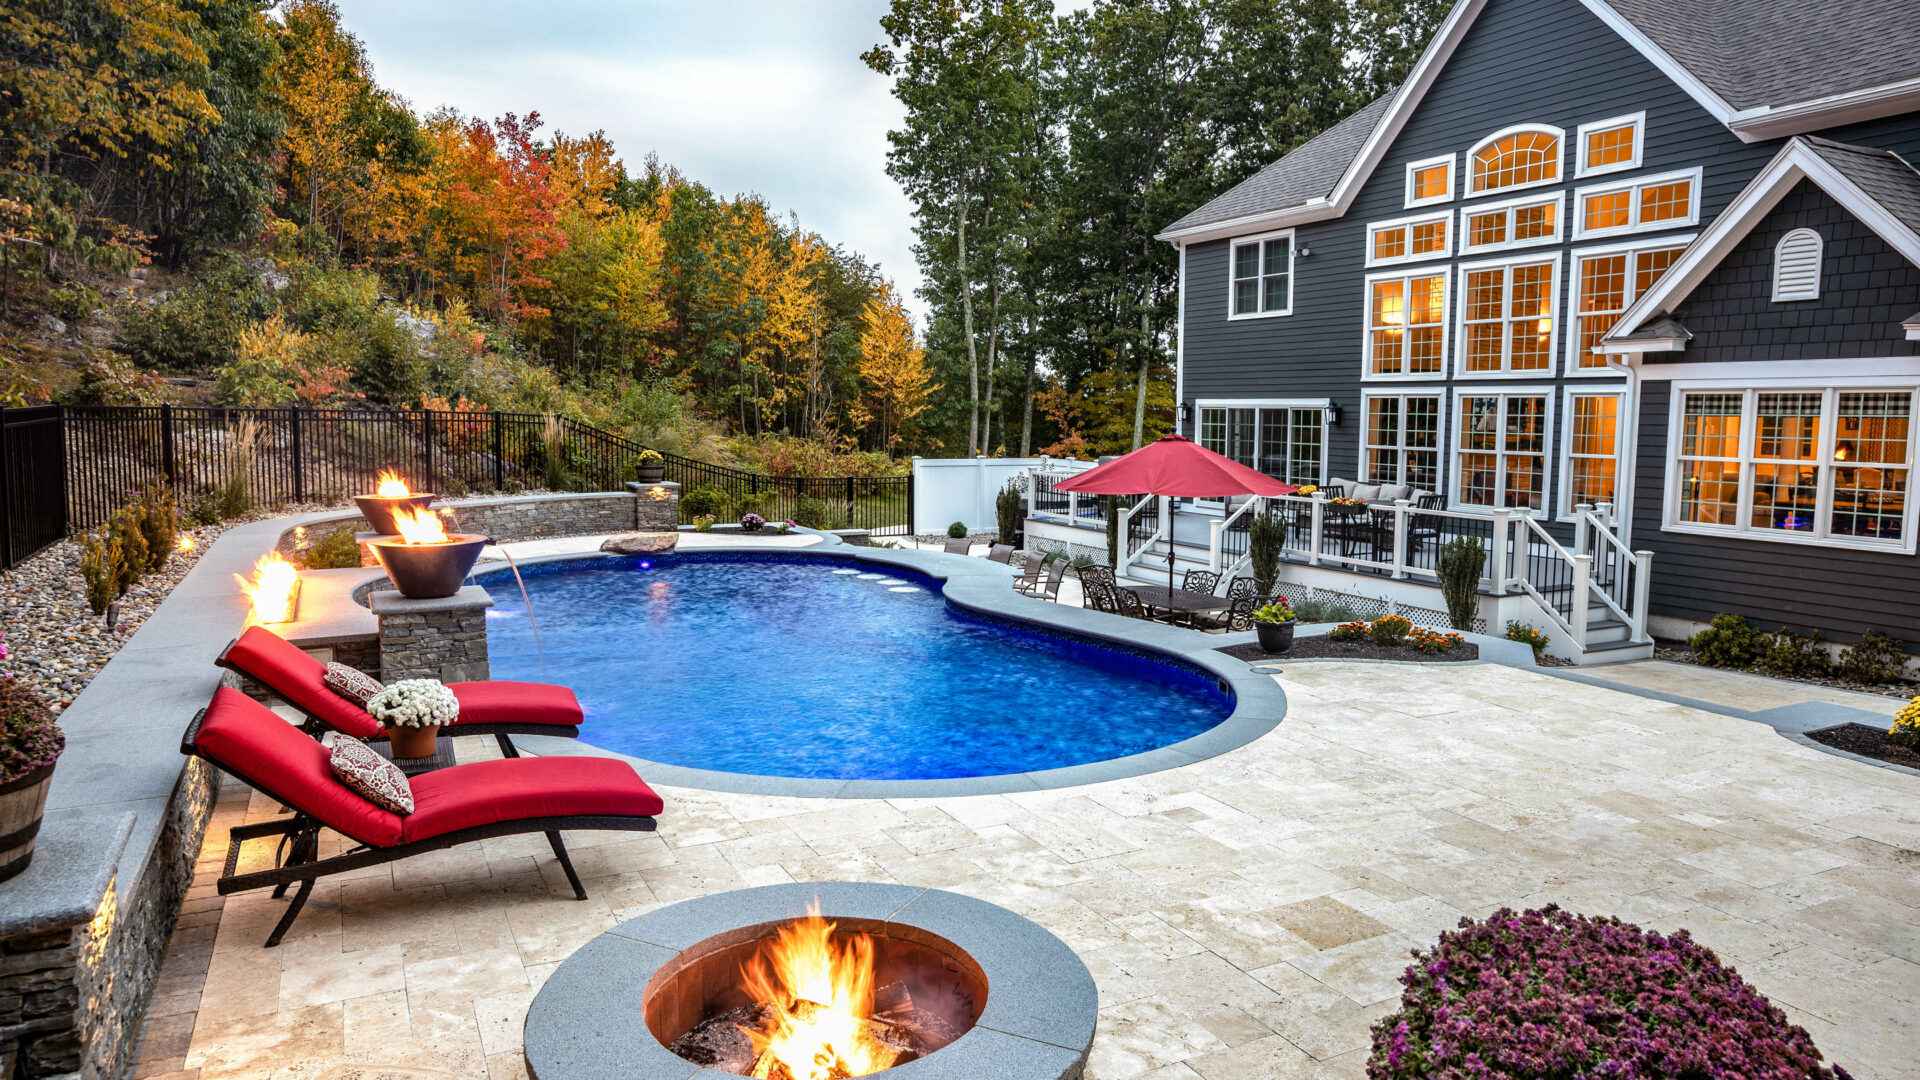 Chairs and fire pits surrounding a pool.